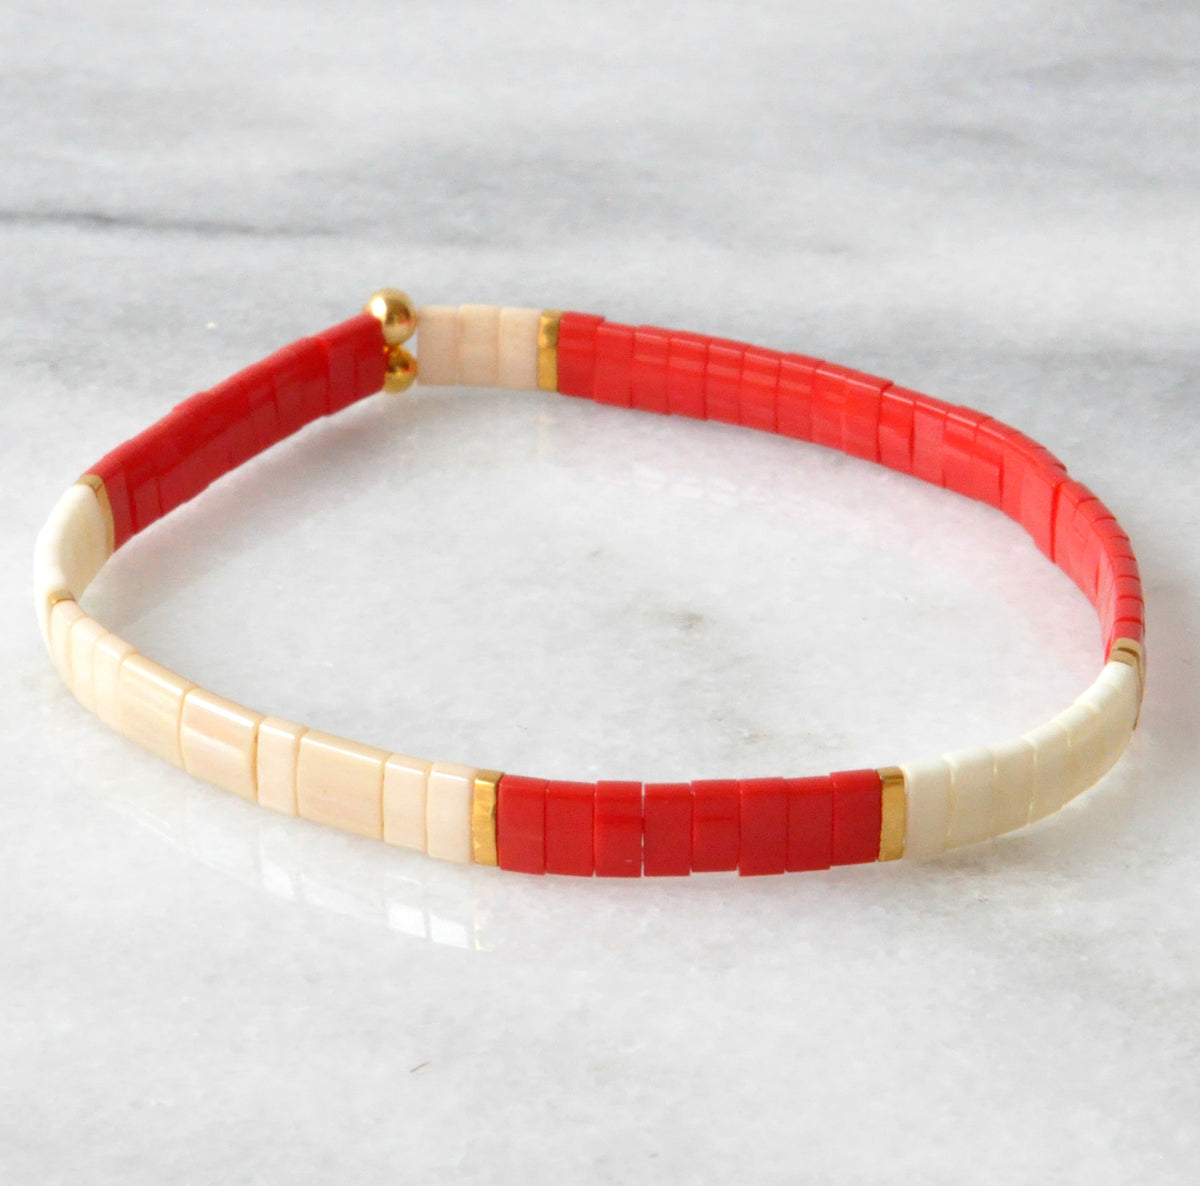 Stretch Tile Bracelet - Red Colorblock | Handmade by Libby & Smee